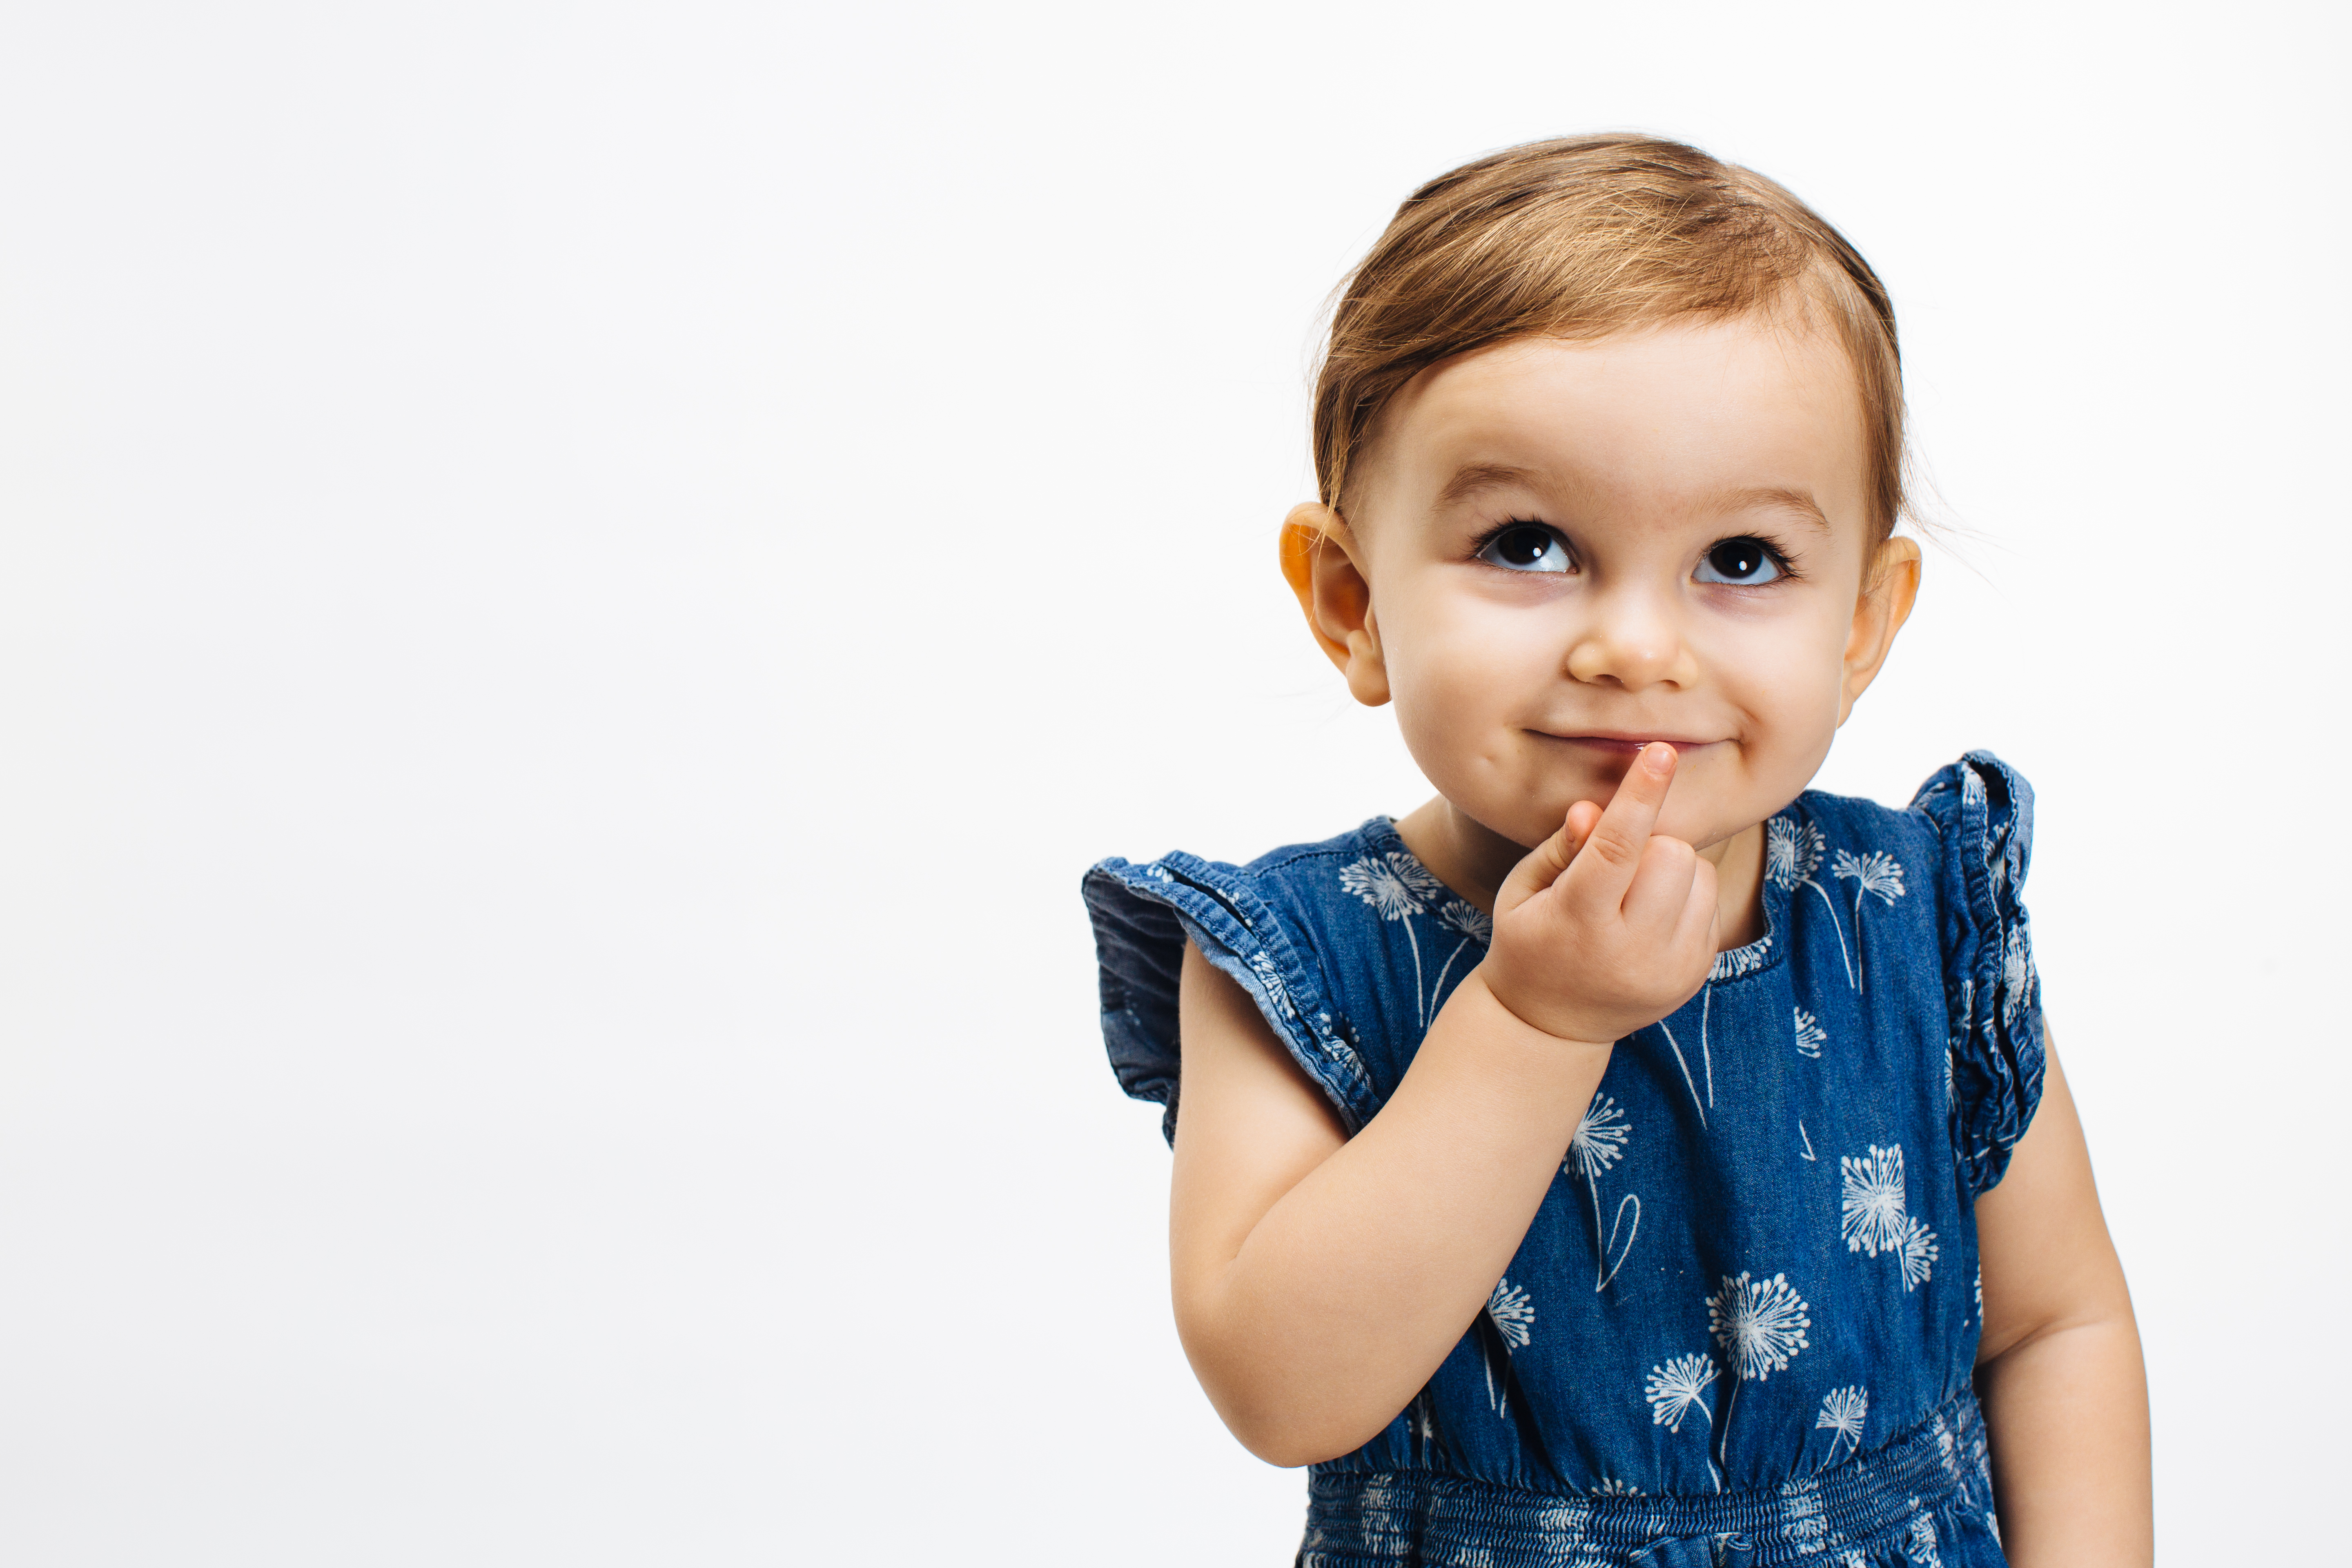 The unwanted milestone: the first time your toddler repeats a swear word